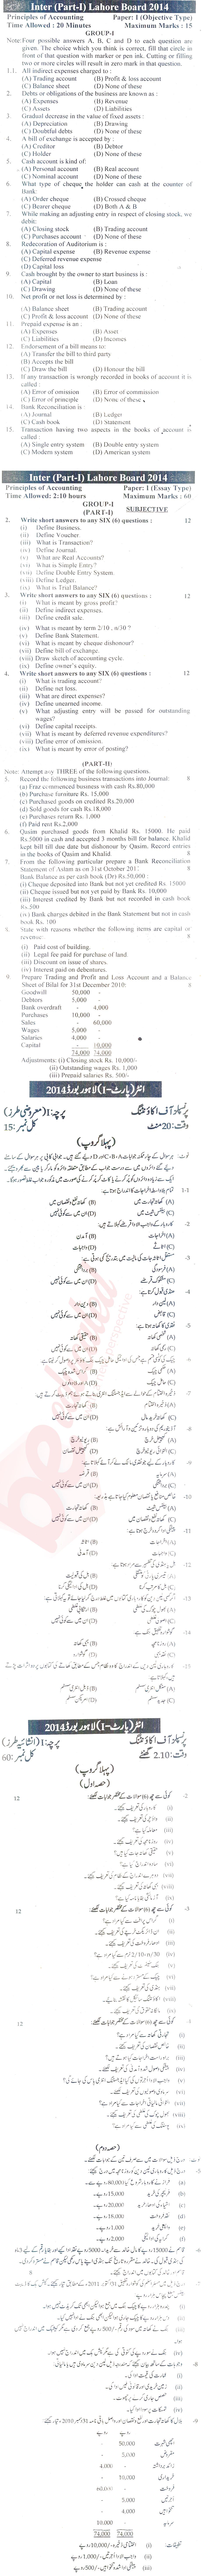 Principles of Accounting ICOM Part 1 Past Paper Group 1 BISE Lahore 2014